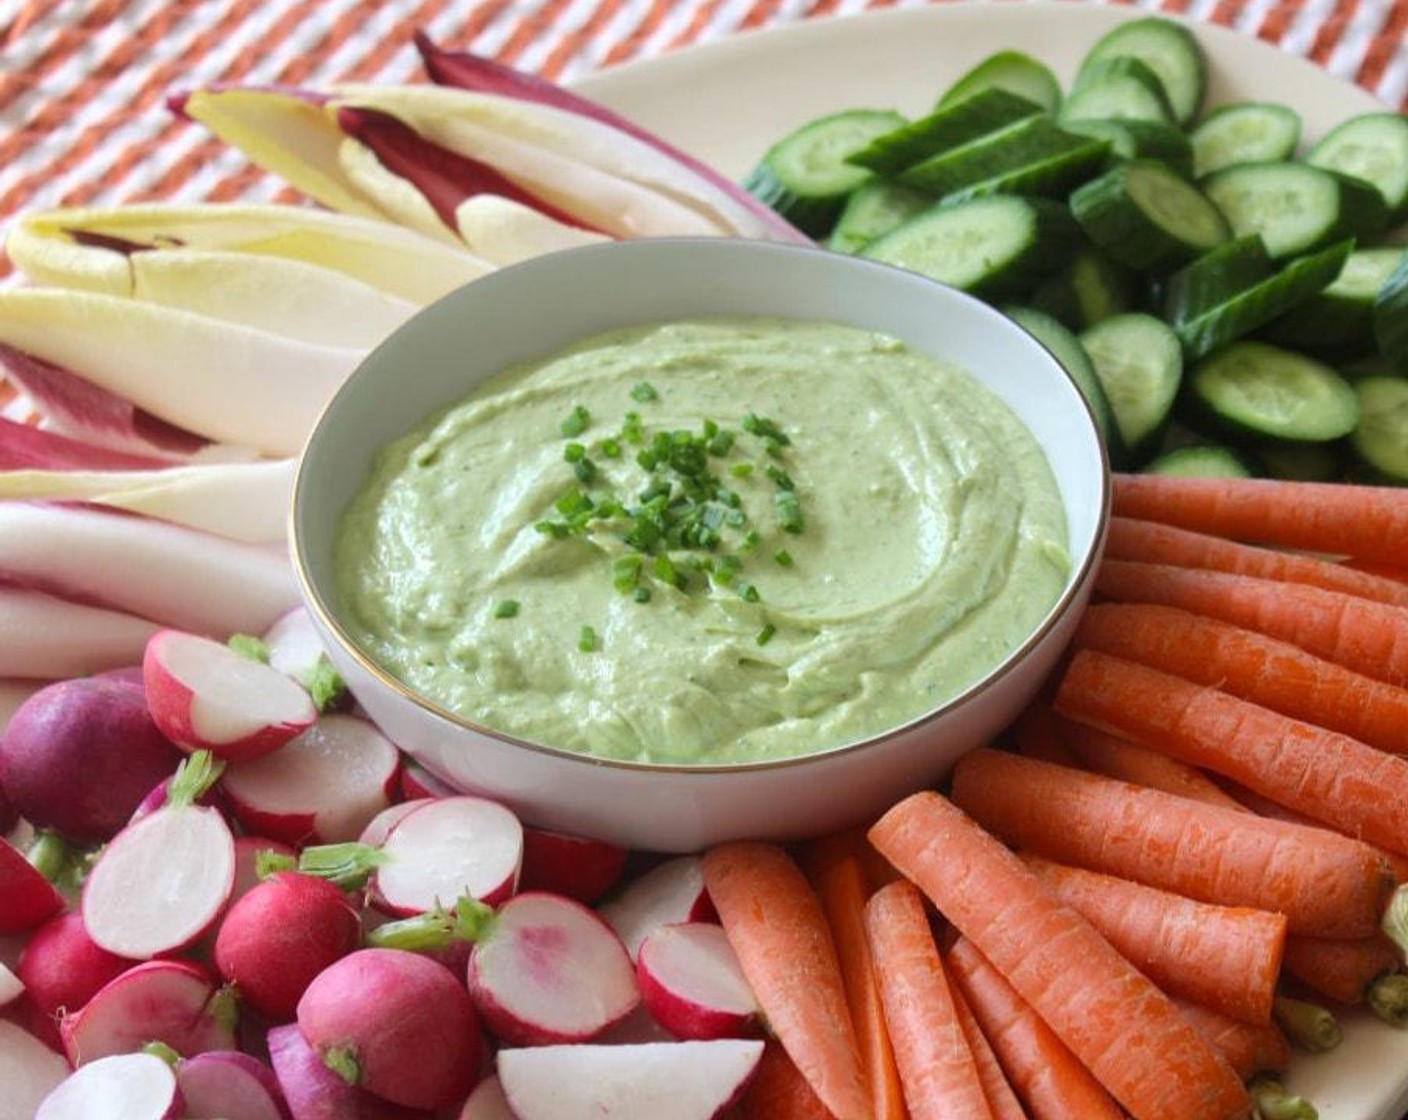 step 4 Serve immediately with crudités or cracker, or refrigerate in a sealed container with a piece of plastic wrap pressed against the surface of the dip to prevent browning for up to 24 hours.